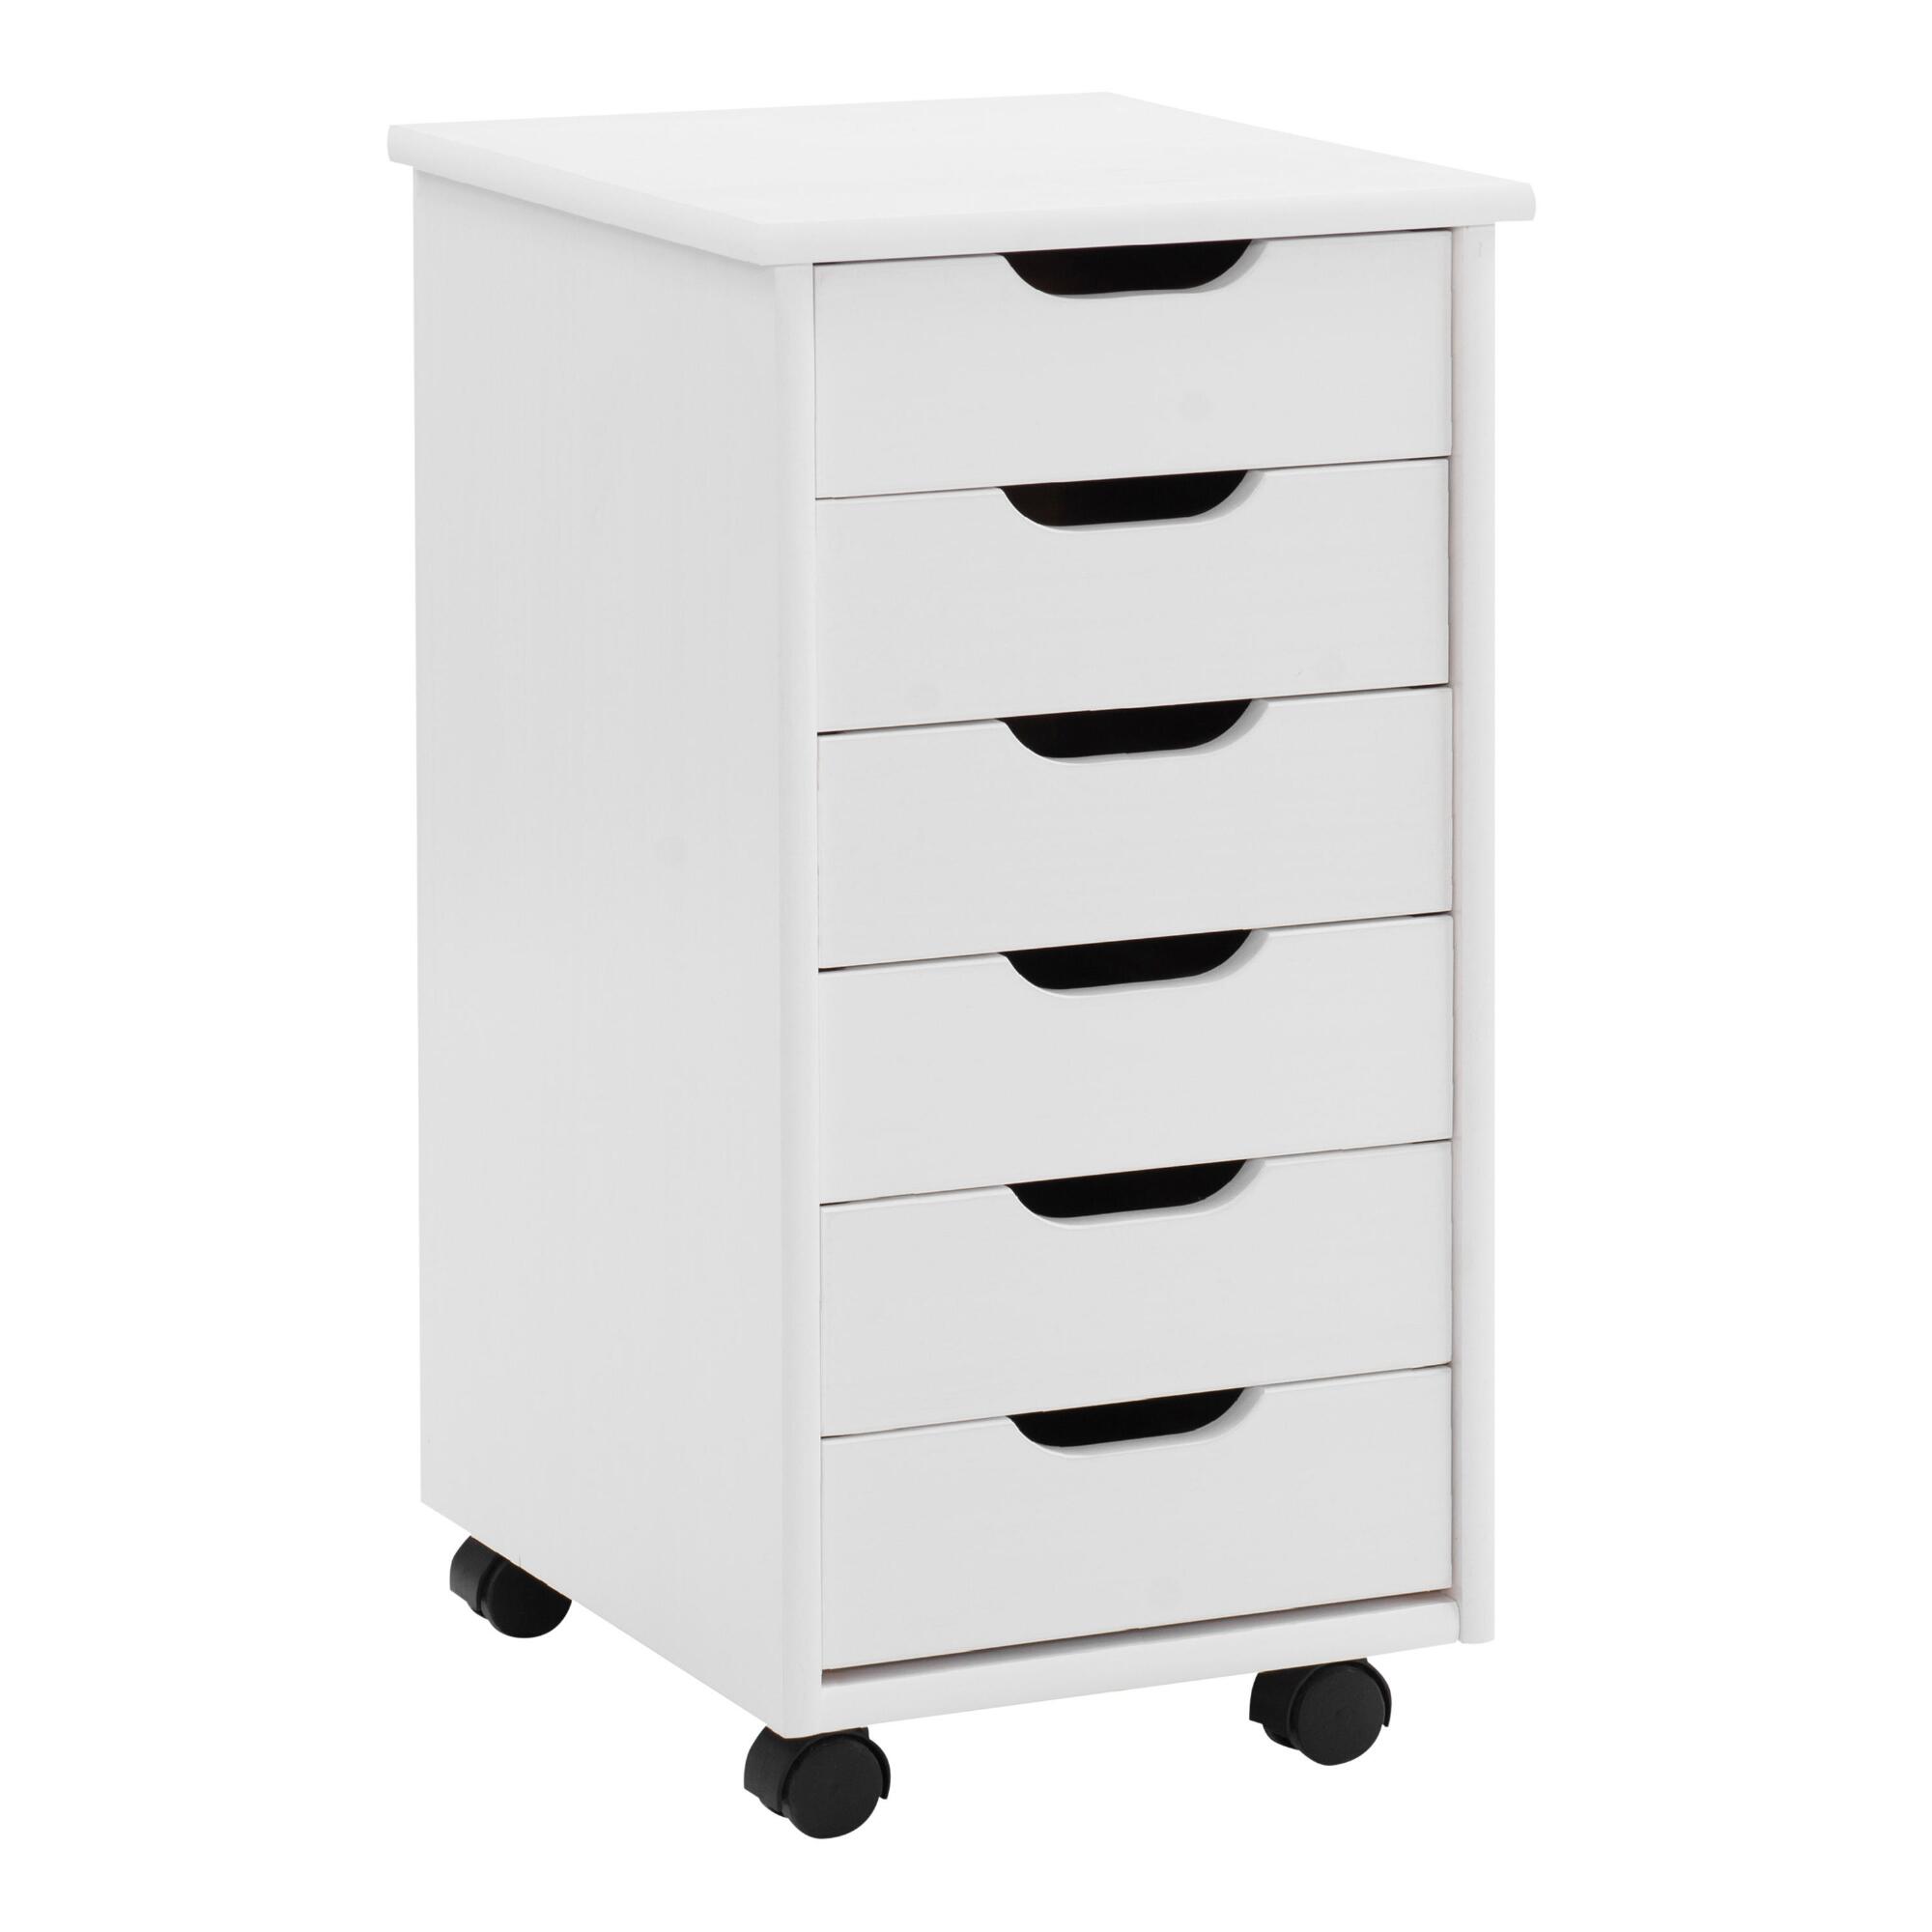 Pine Wood 6 Drawer Kerry Rolling Storage Cart: Gray by World Market